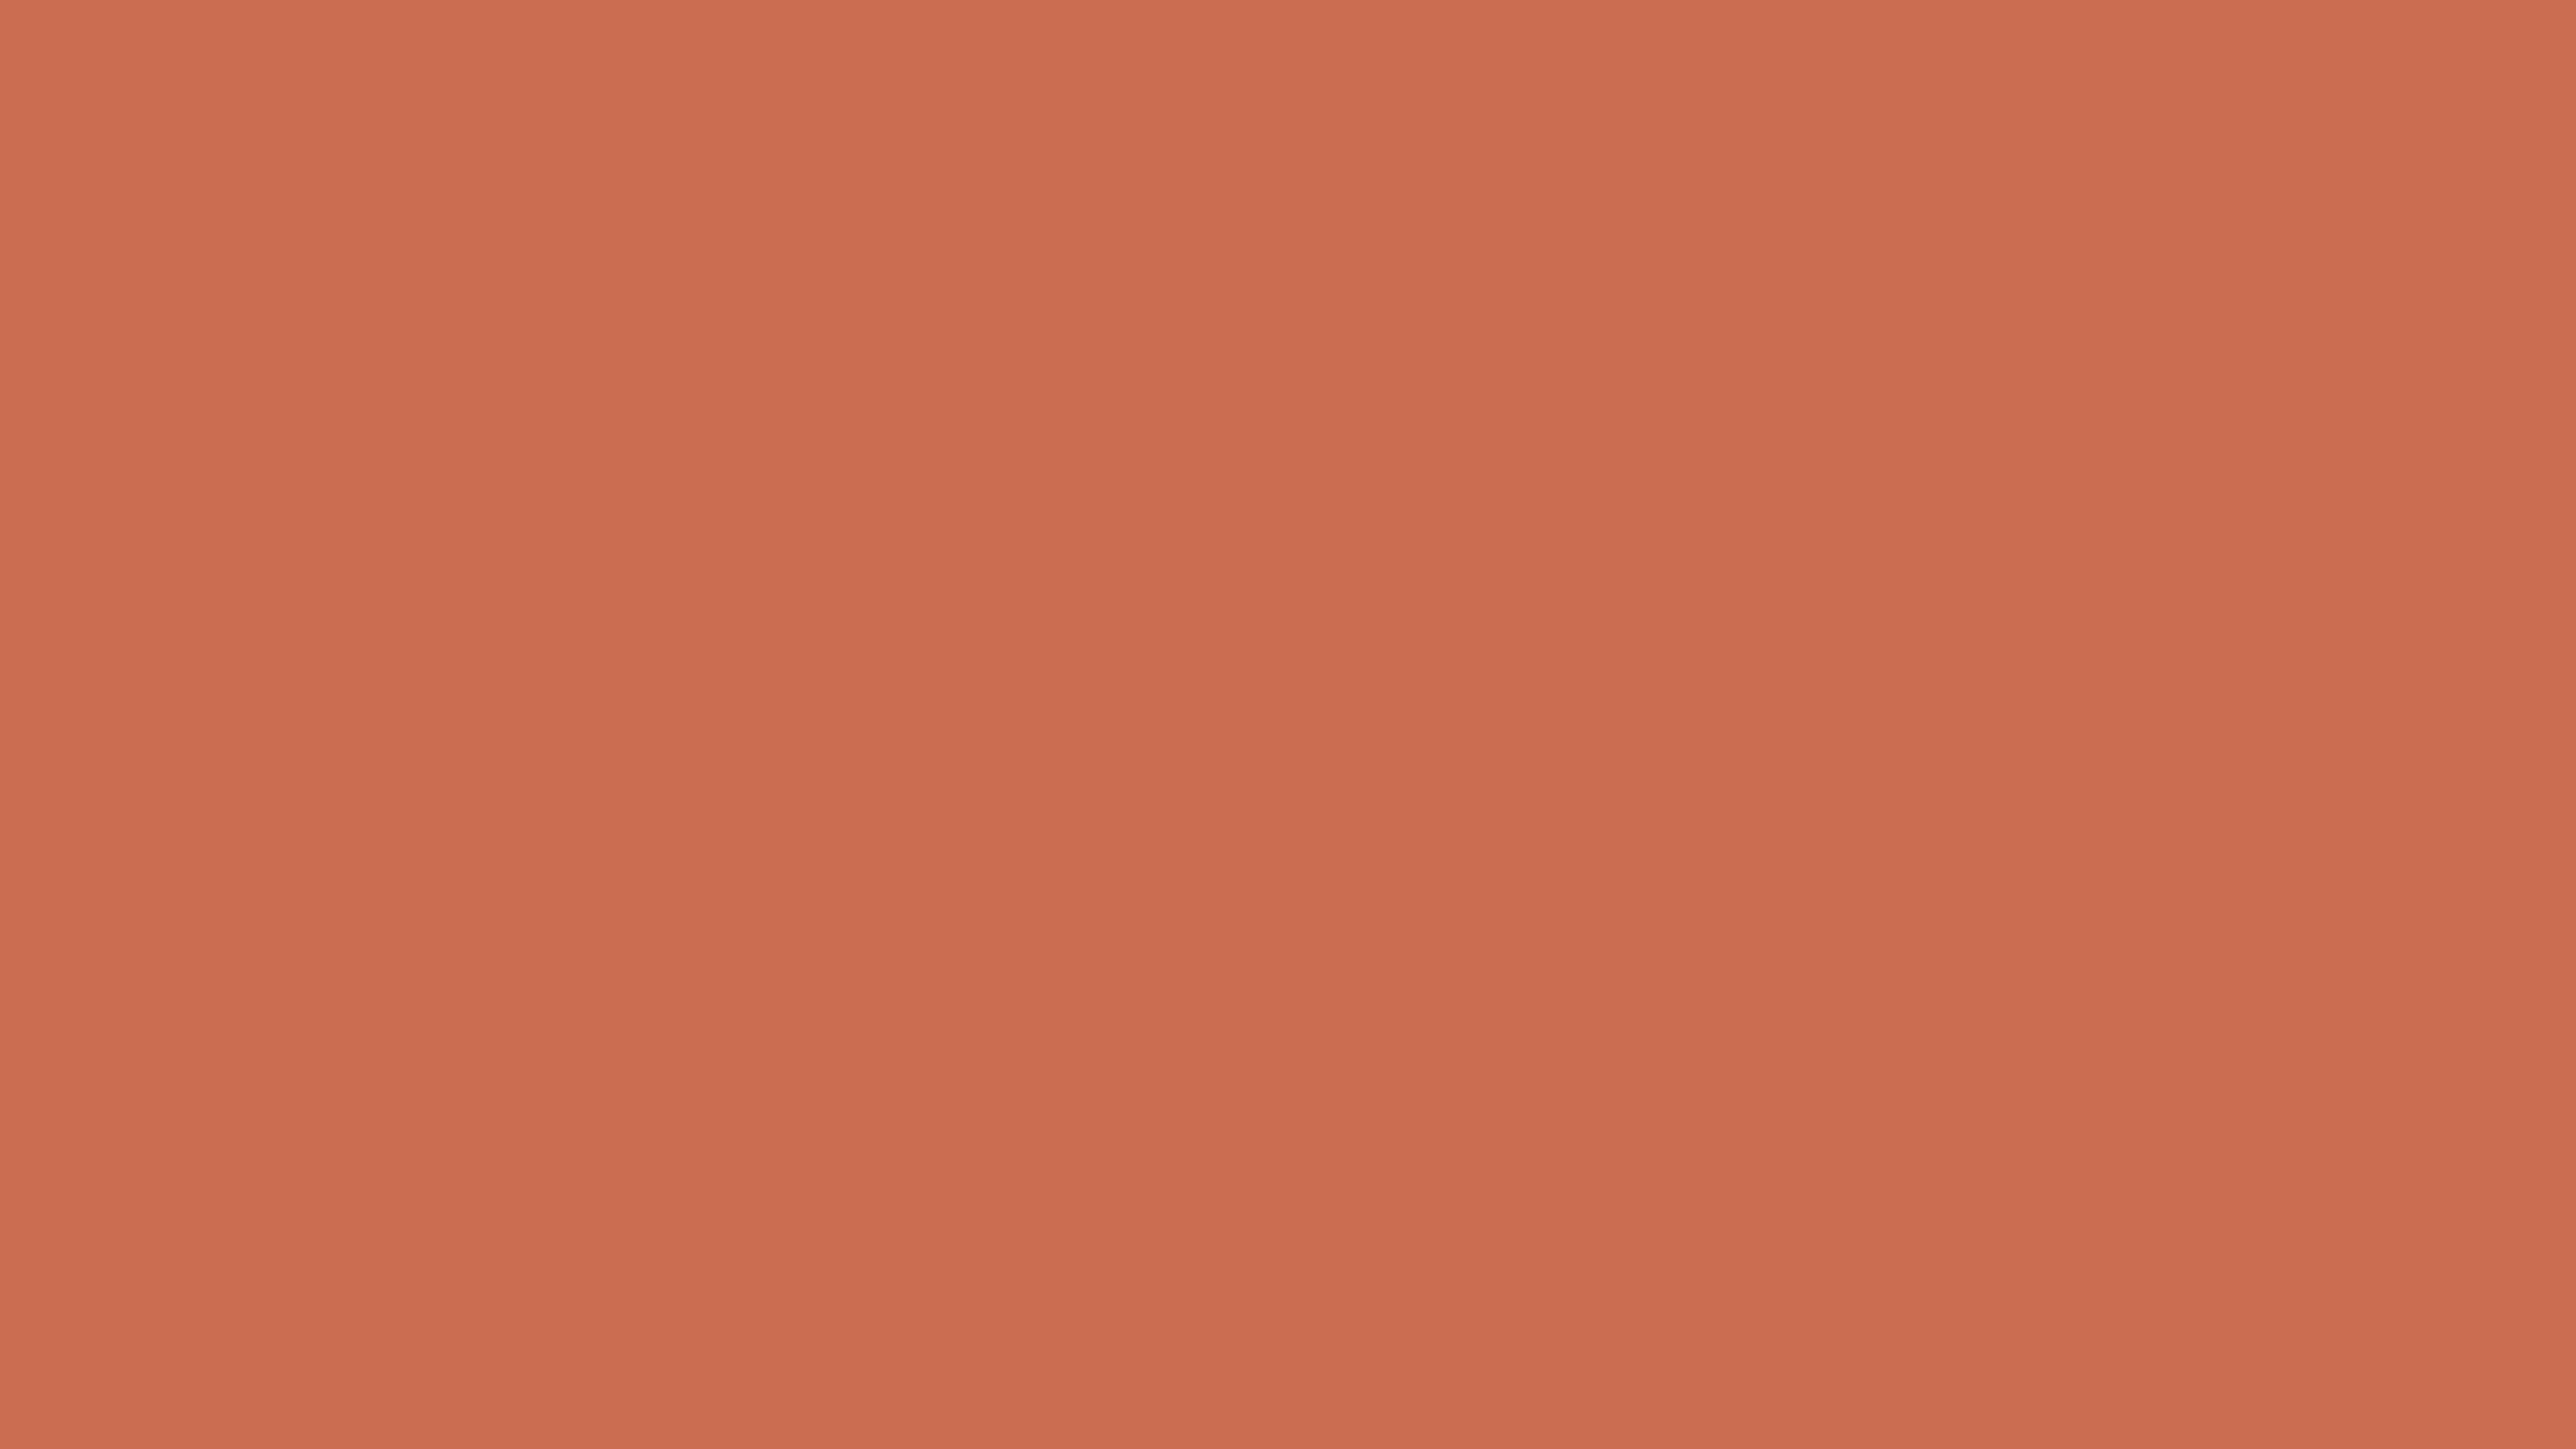 7680x4320 Copper Red Solid Color Background